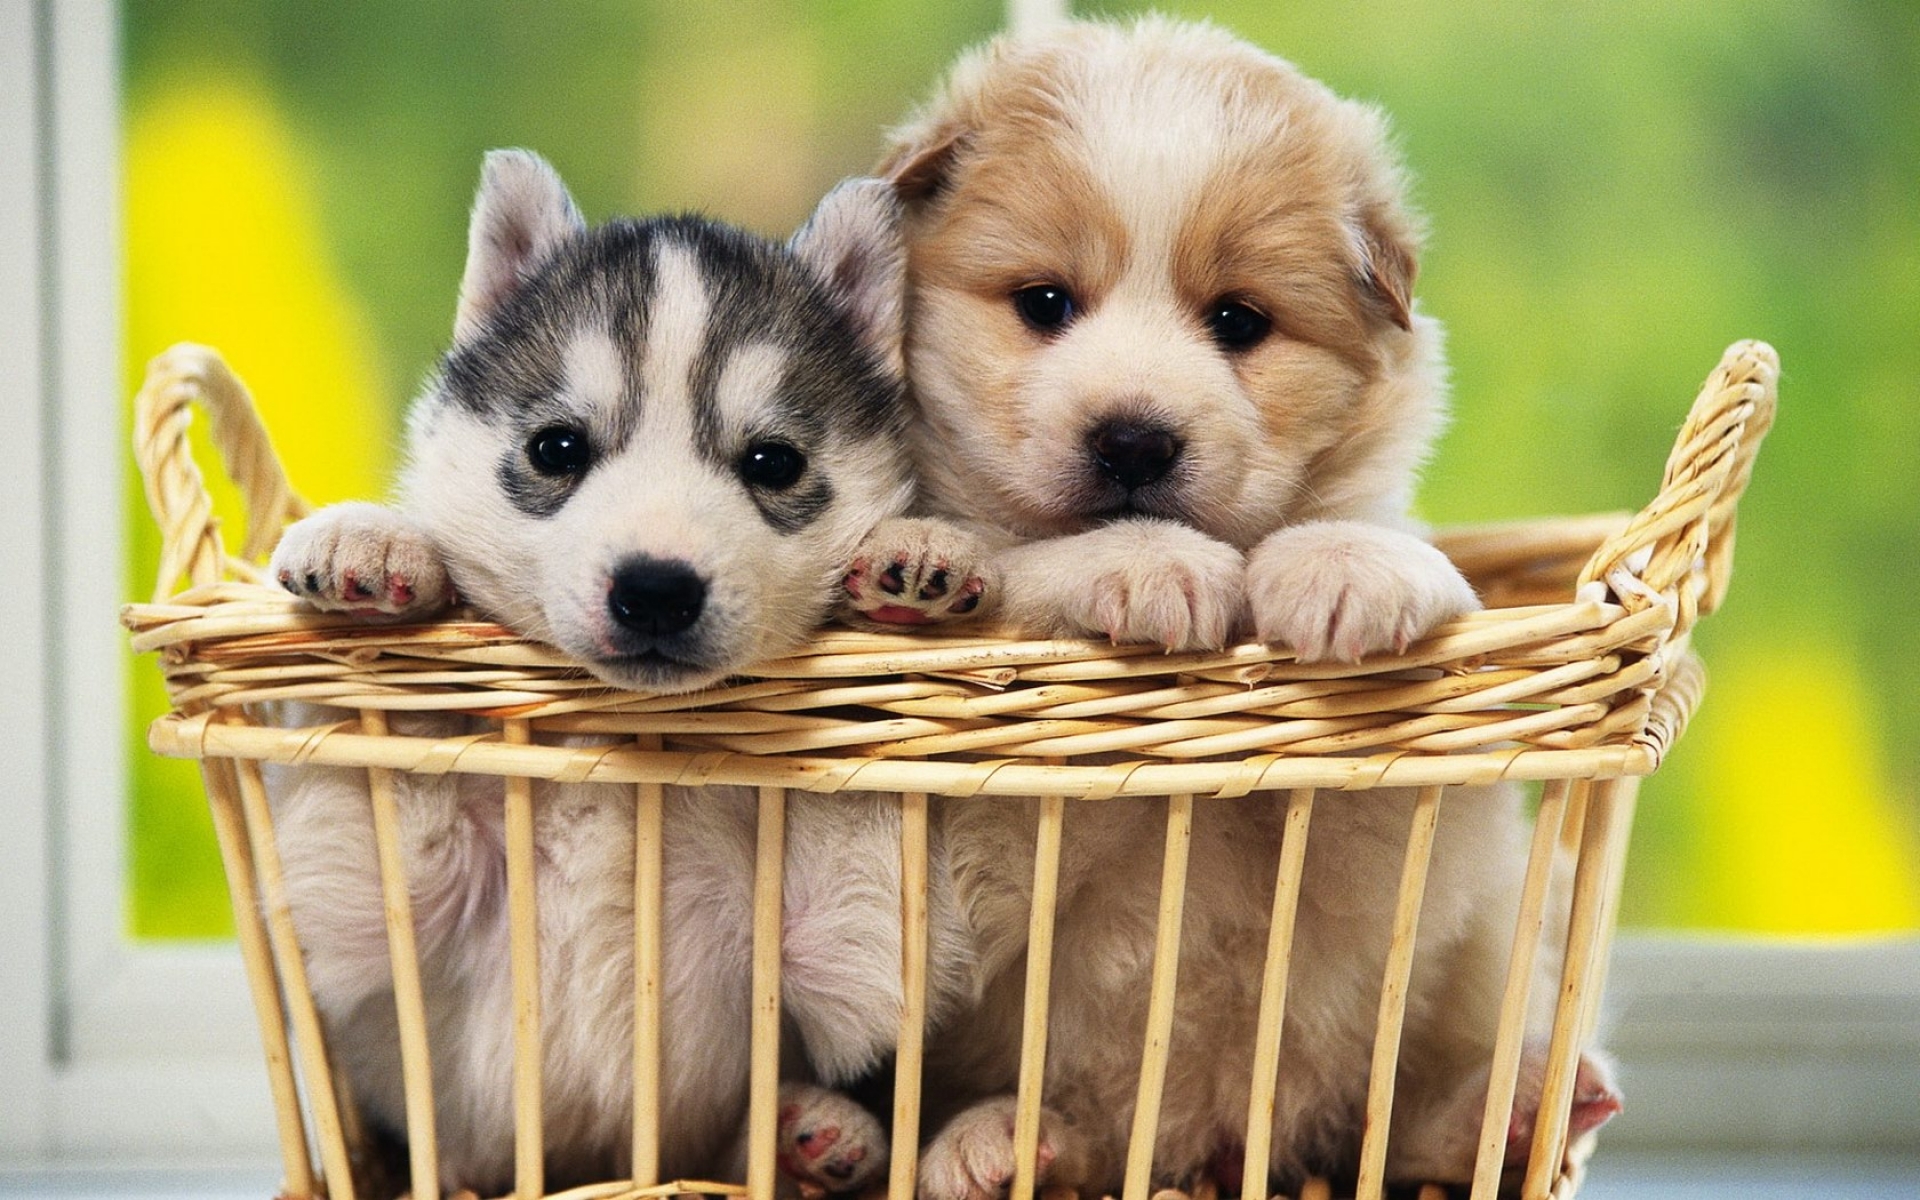 cute pair of puppies background2